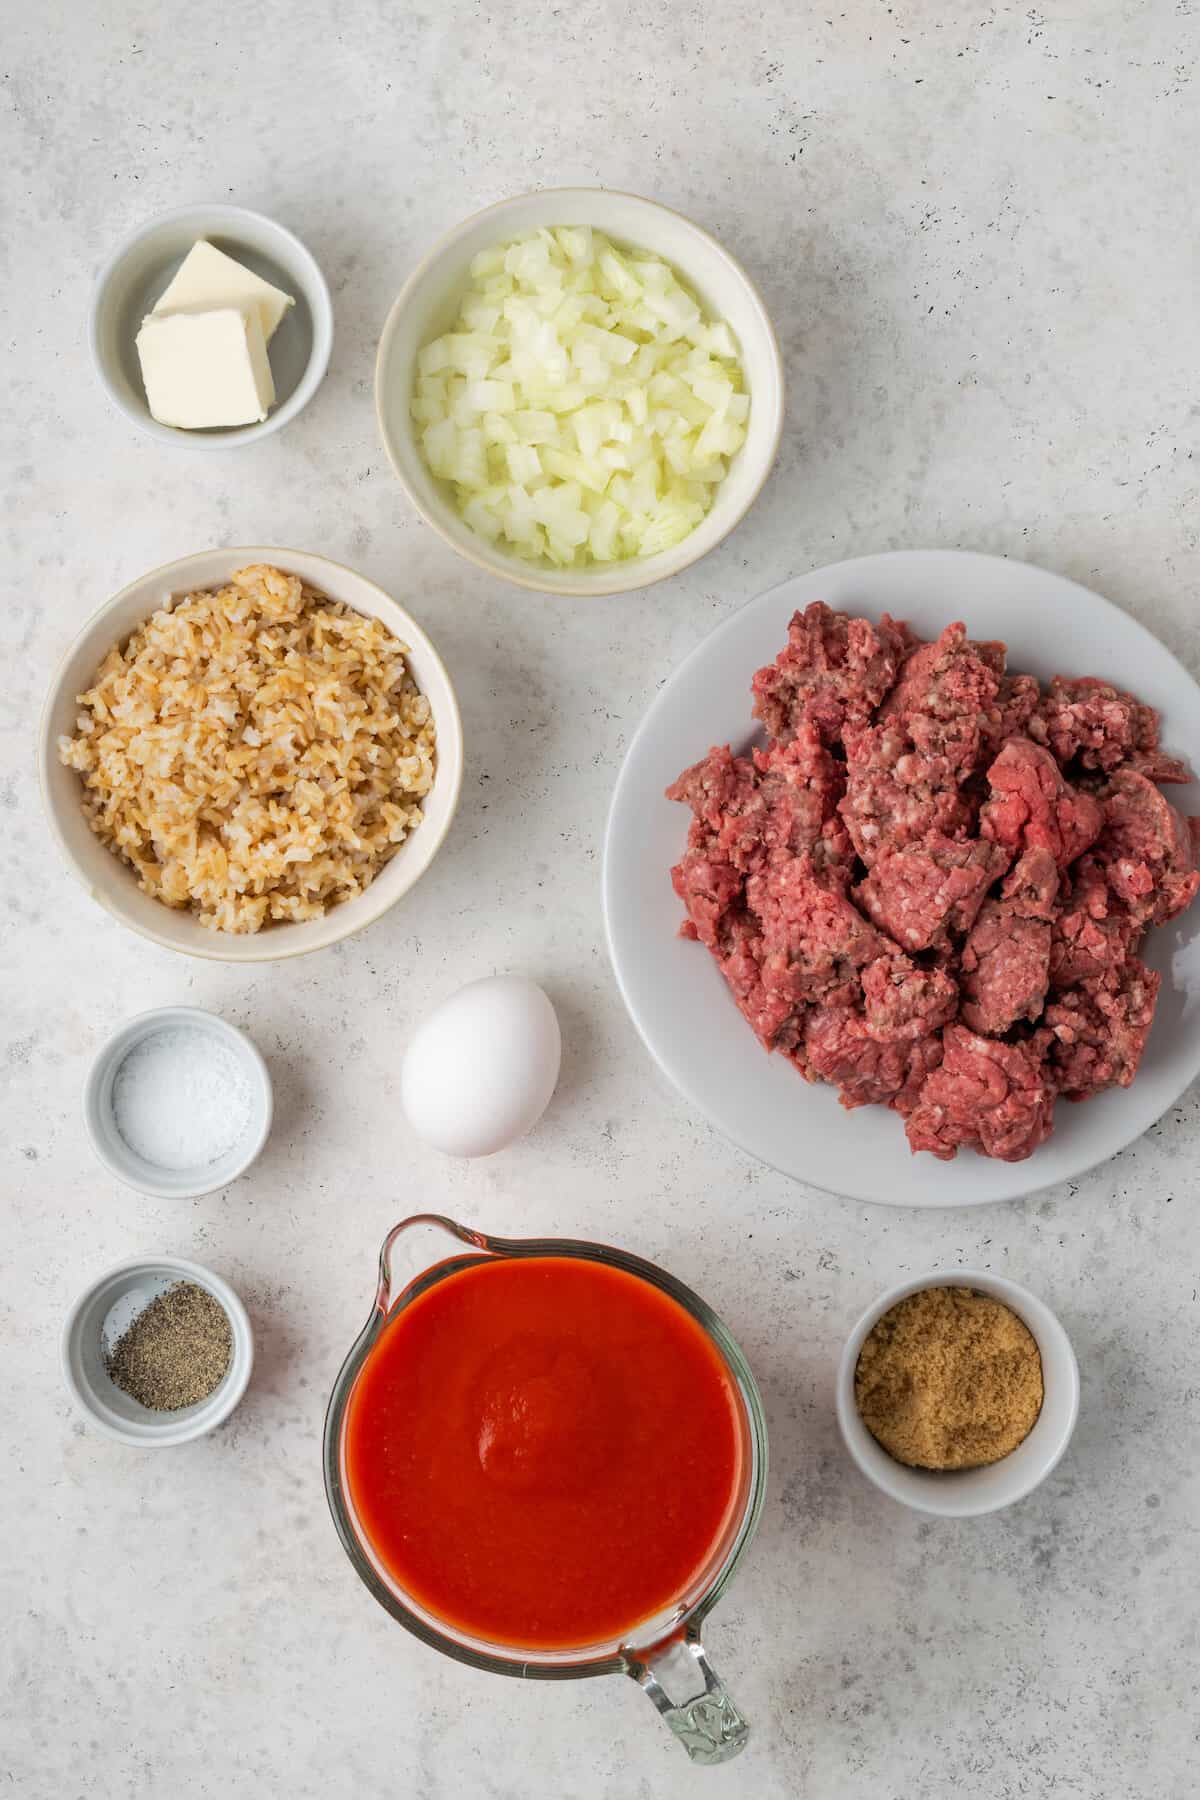 The ingredients needed to make porcupine meatballs are shown portioned out on a white background: ground beef, chopped onions, brown rice, salt and pepper, tomato sauce, egg, and butter.